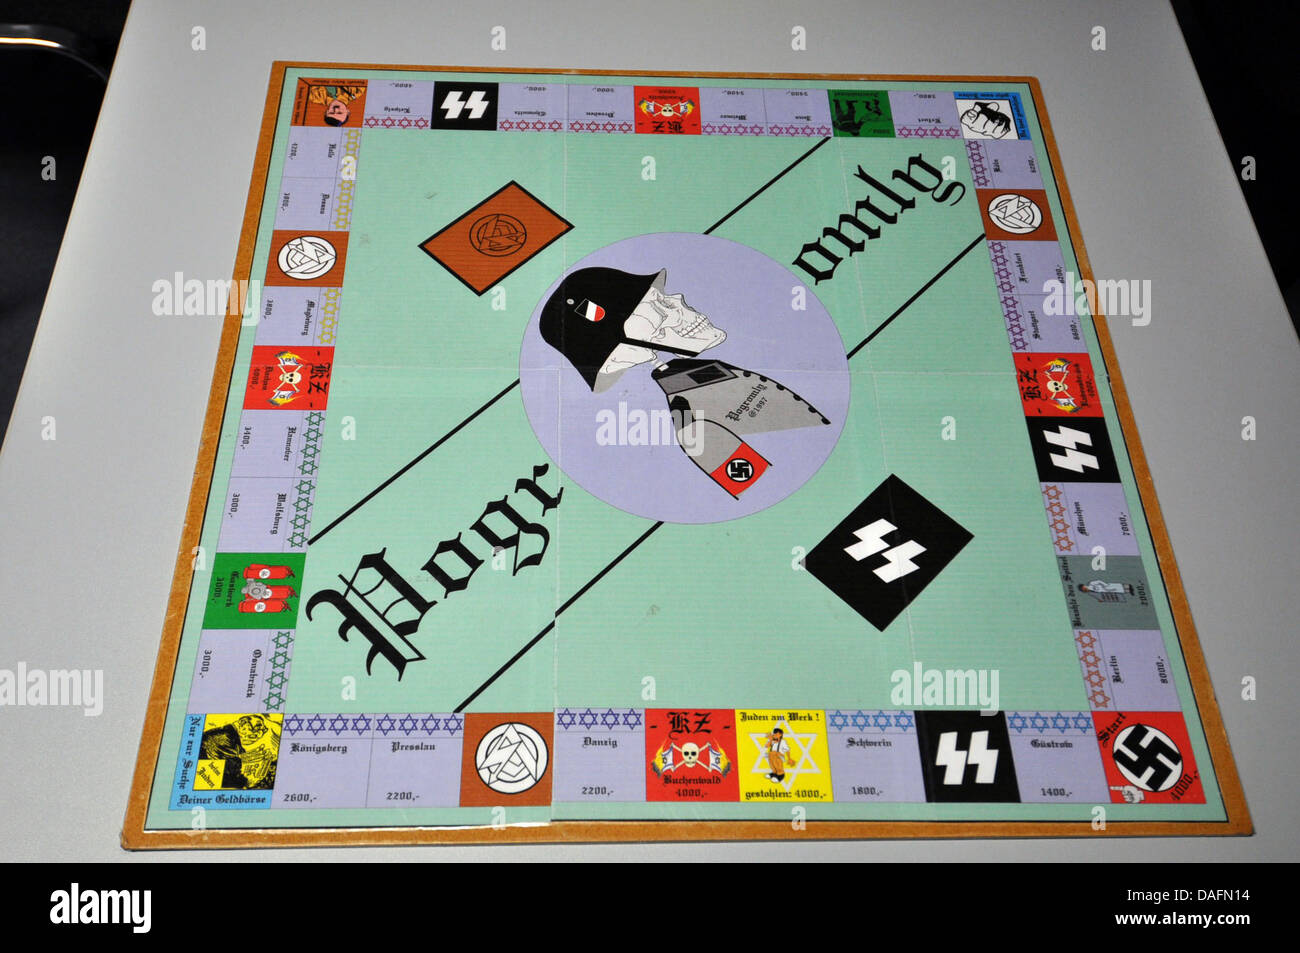 The Anti-Monopoly Board Game That Promoted a 'Soviet America' - Atlas  Obscura